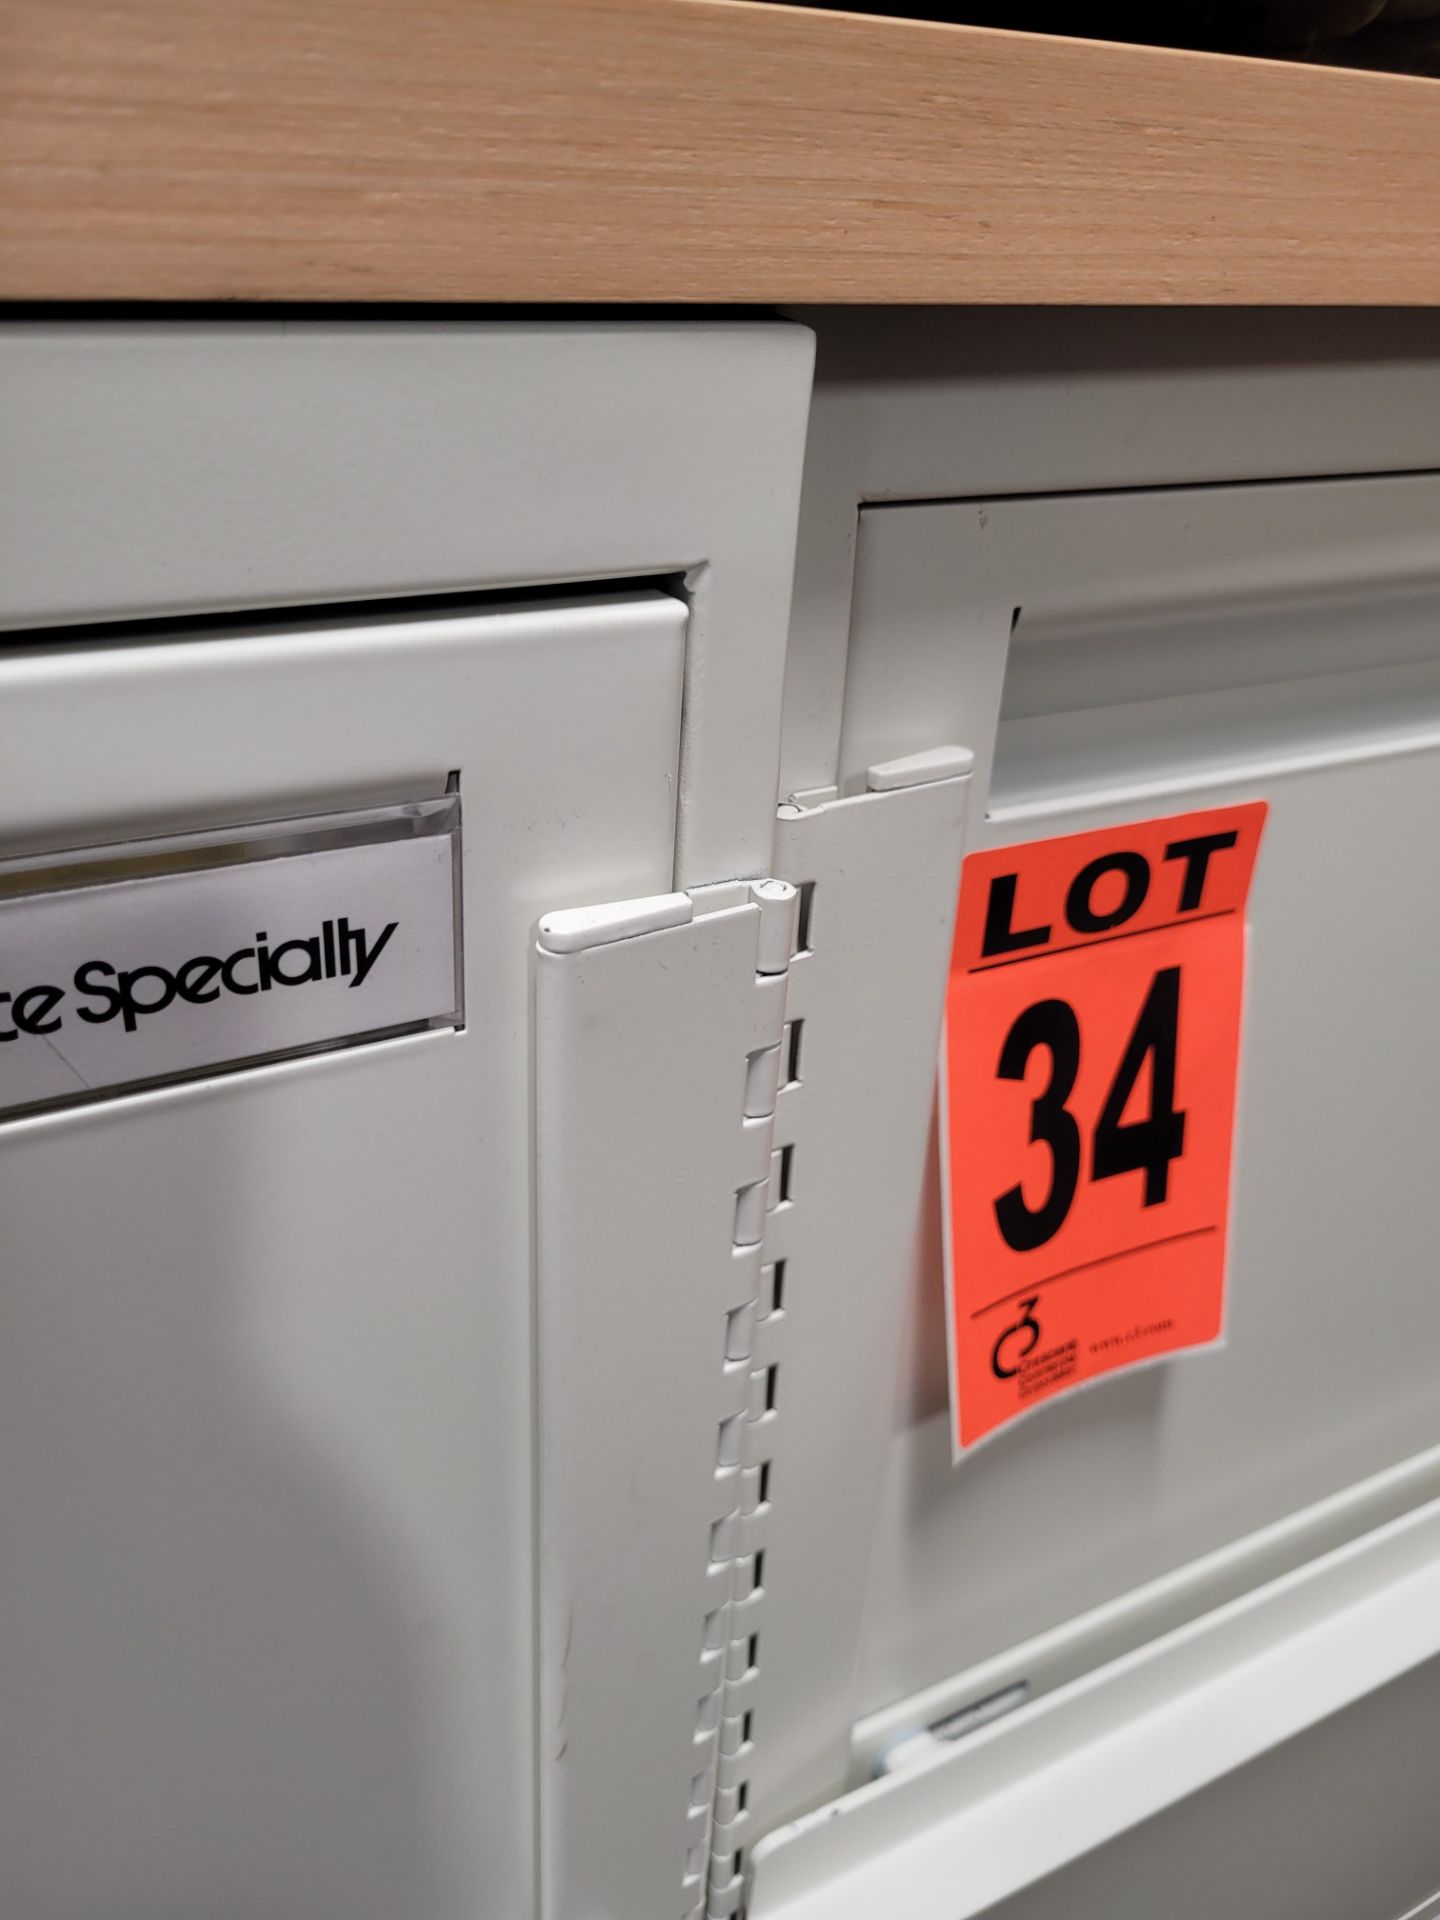 OFFICE SPECIALLY 3-door horizontal filing cabinets with lockbar - Image 3 of 4